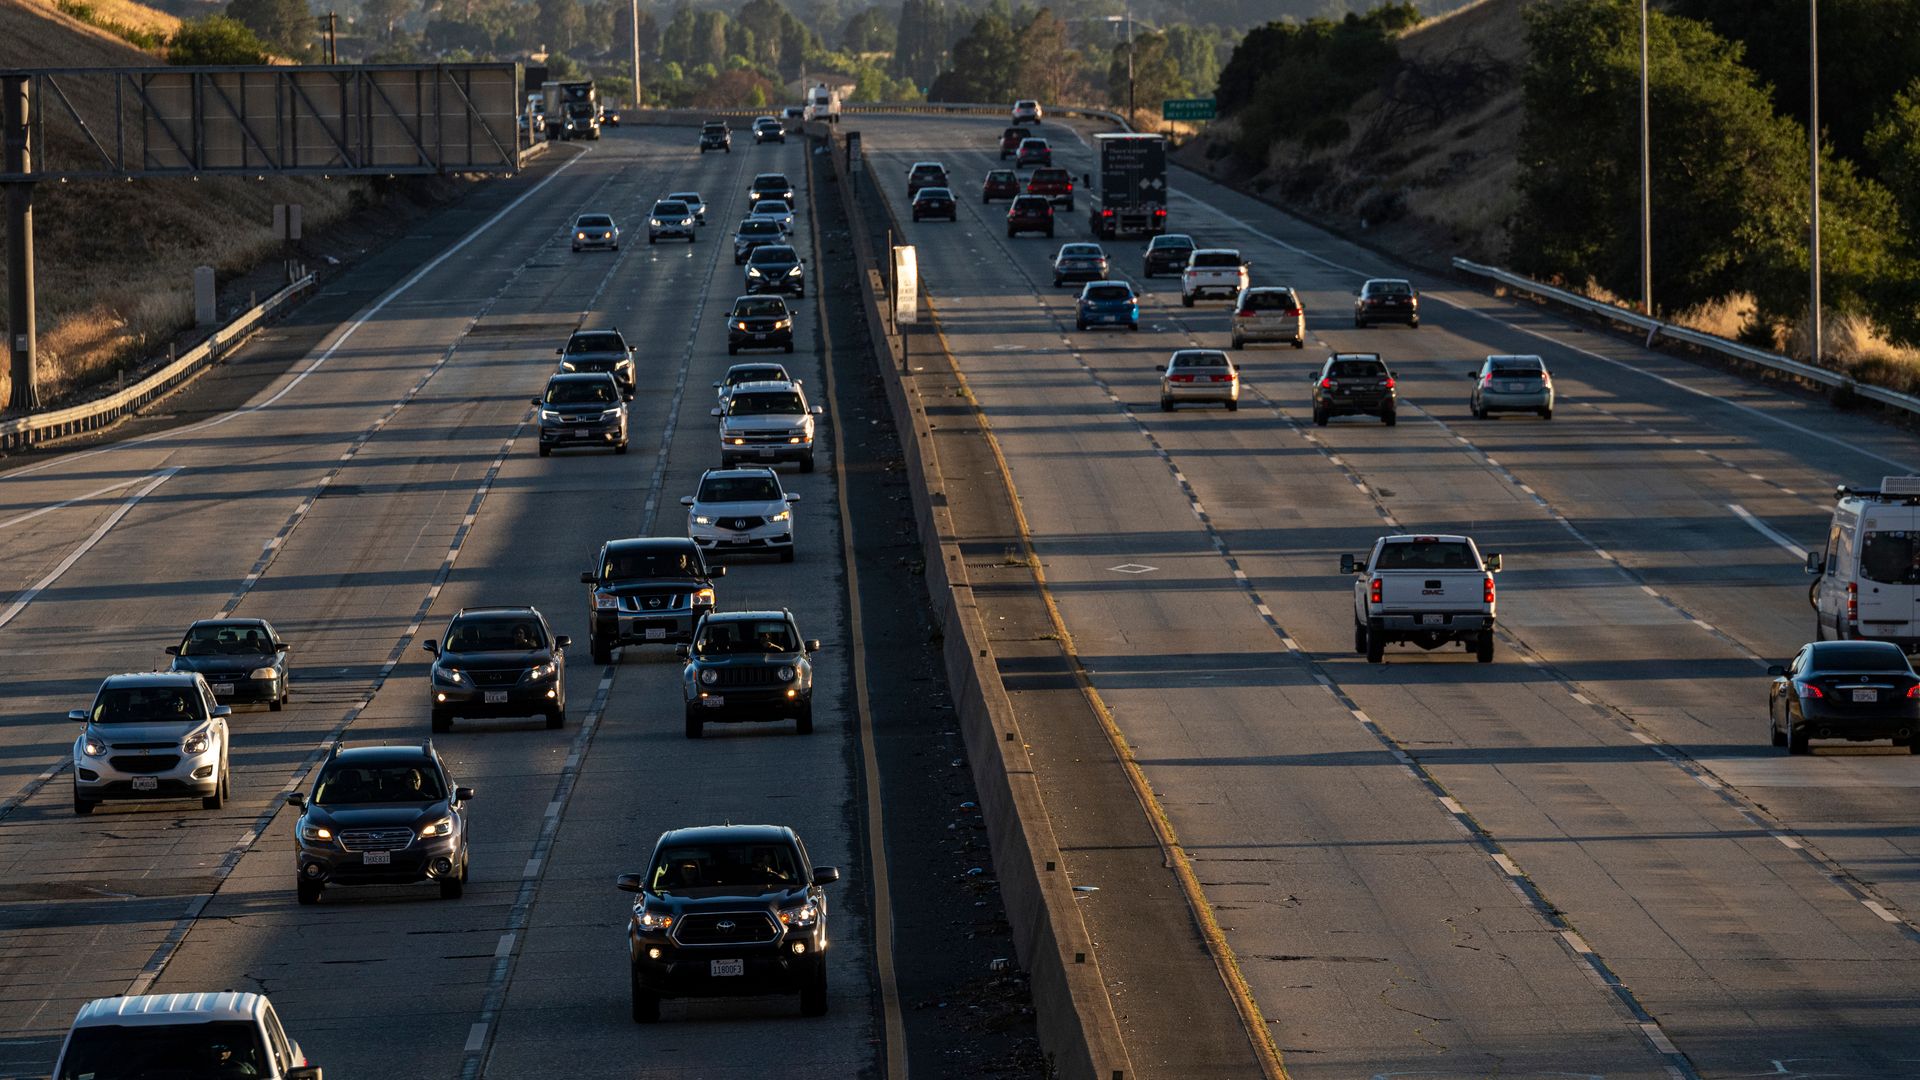 Cars hit the road on a California highway.